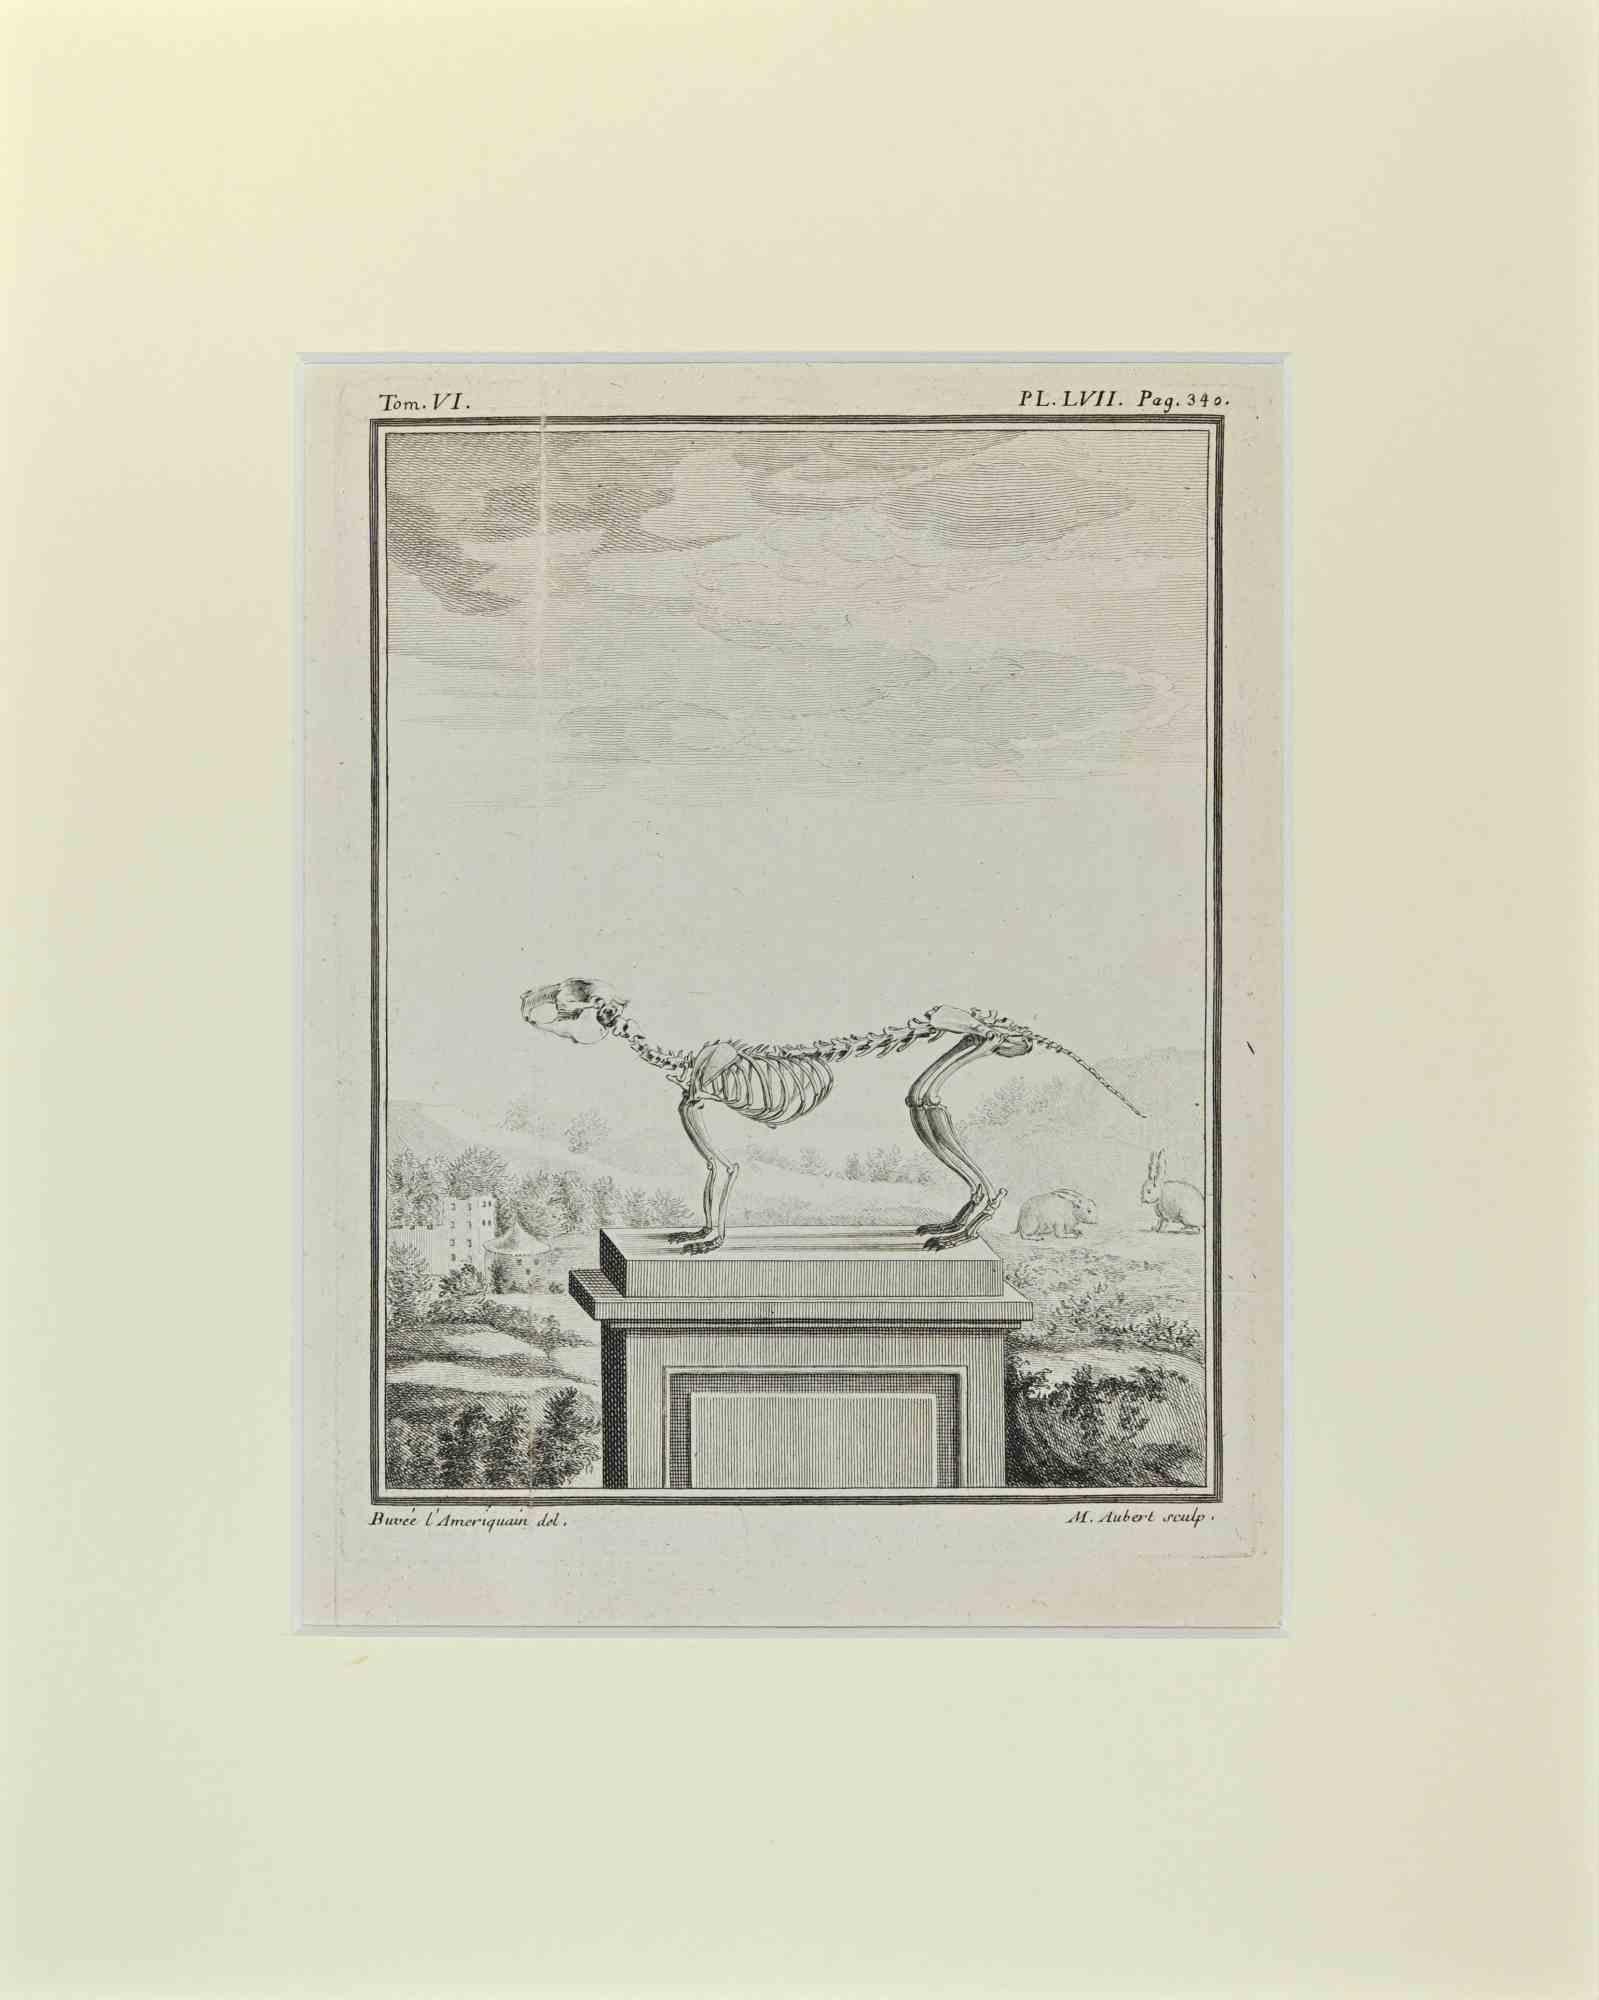 Skeleton Quadrupedes is an artwork realized by Buvée l'Américain in 1771.  

Etching B./W. print  on ivory paper. Signed on  plate on the lower left margin.

The work is glued on cardboard. Total dimensions: 35x28 cm.

The artwork belongs to the